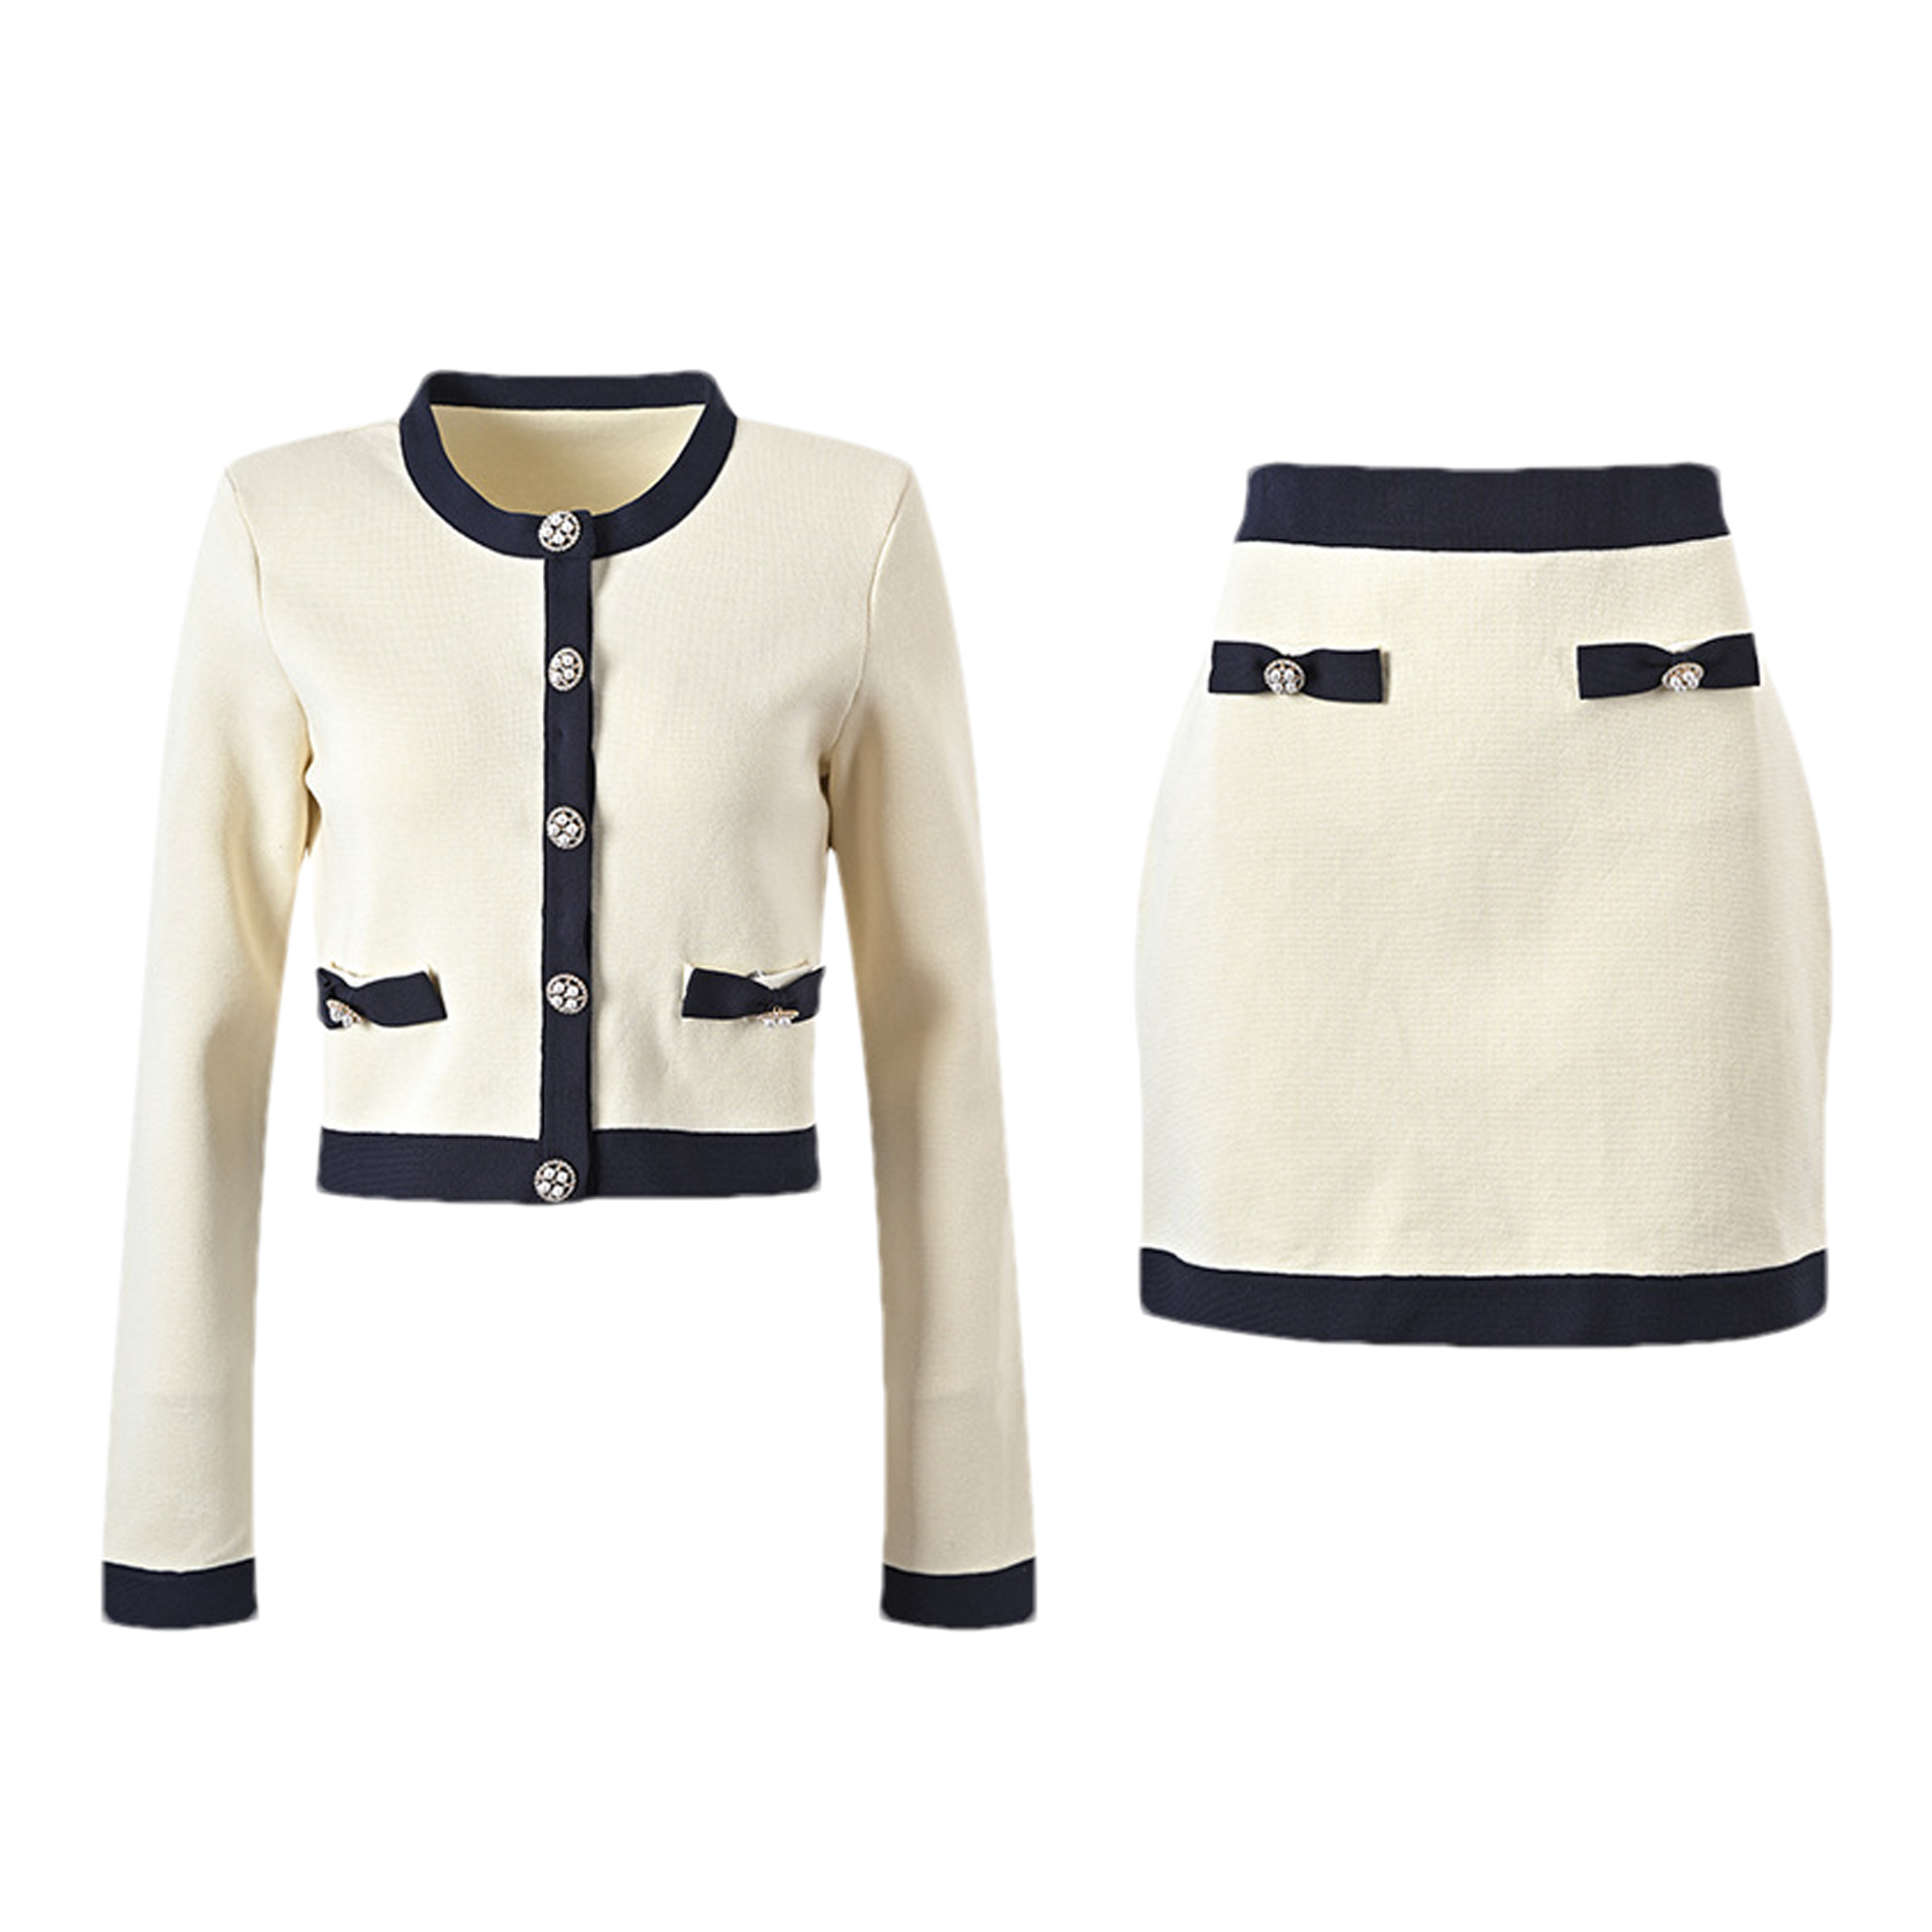 Lucie contrast colours jacket & skirt matching set